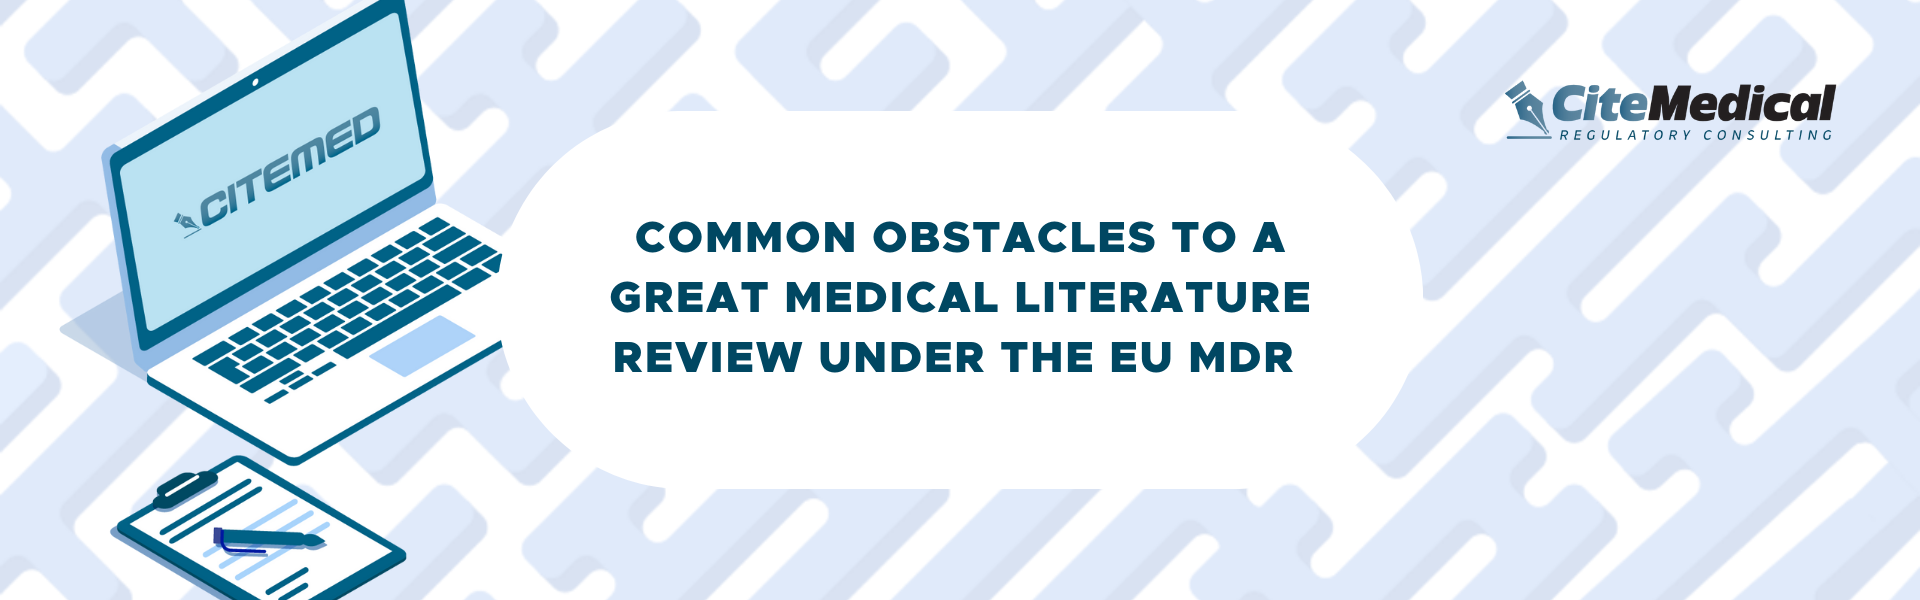 medical literature review under the EU MDR